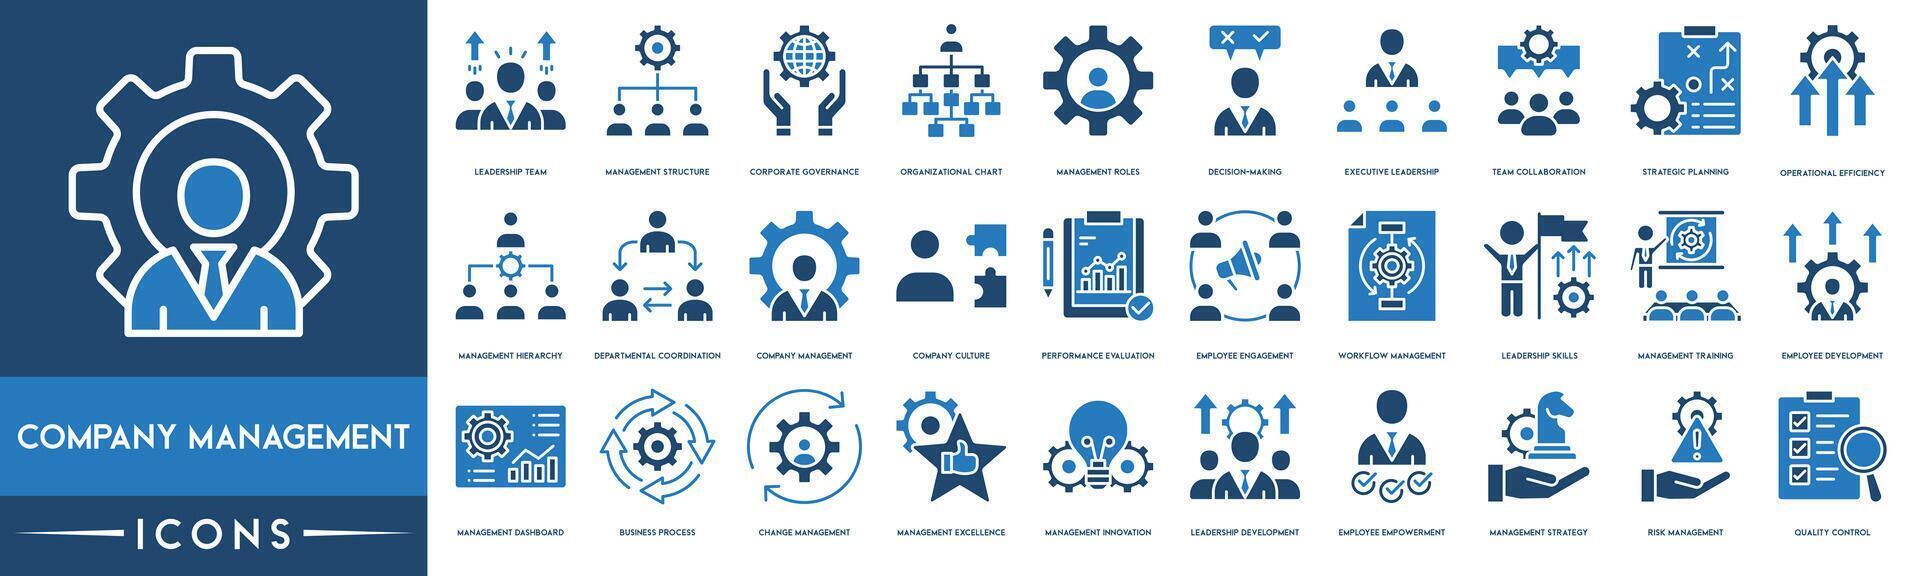 Company Management, Leadership Team, Management, Decision Making, Team Collaboration, Strategic Planning, Management Consulting, Employee Engagement, Workflow, Leadership Skills and Employee icon set. vector